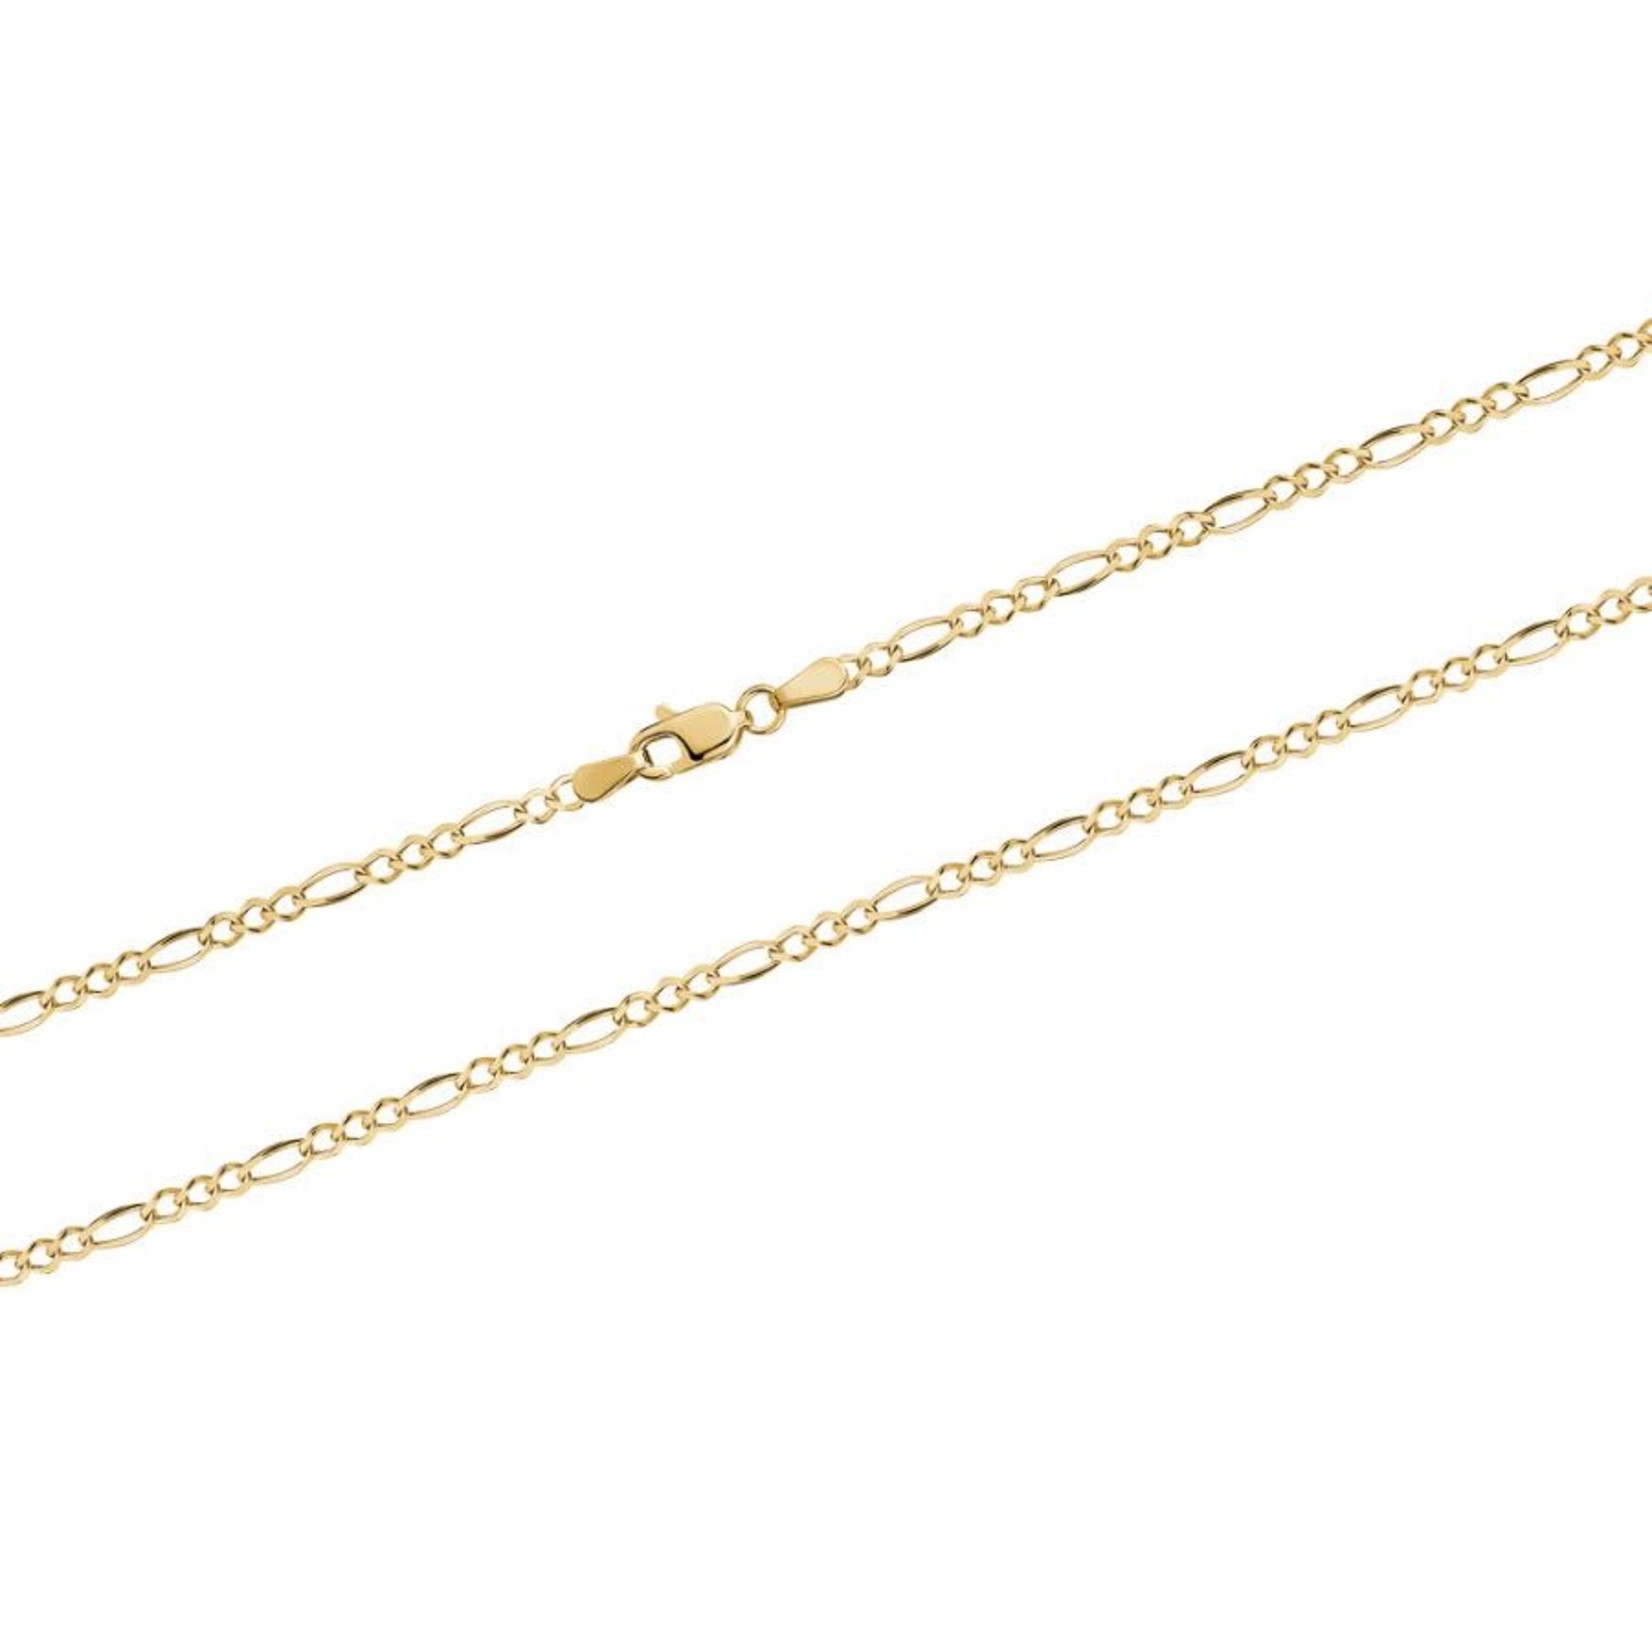 10KY Gold 1.9mm Figario Chain 18"